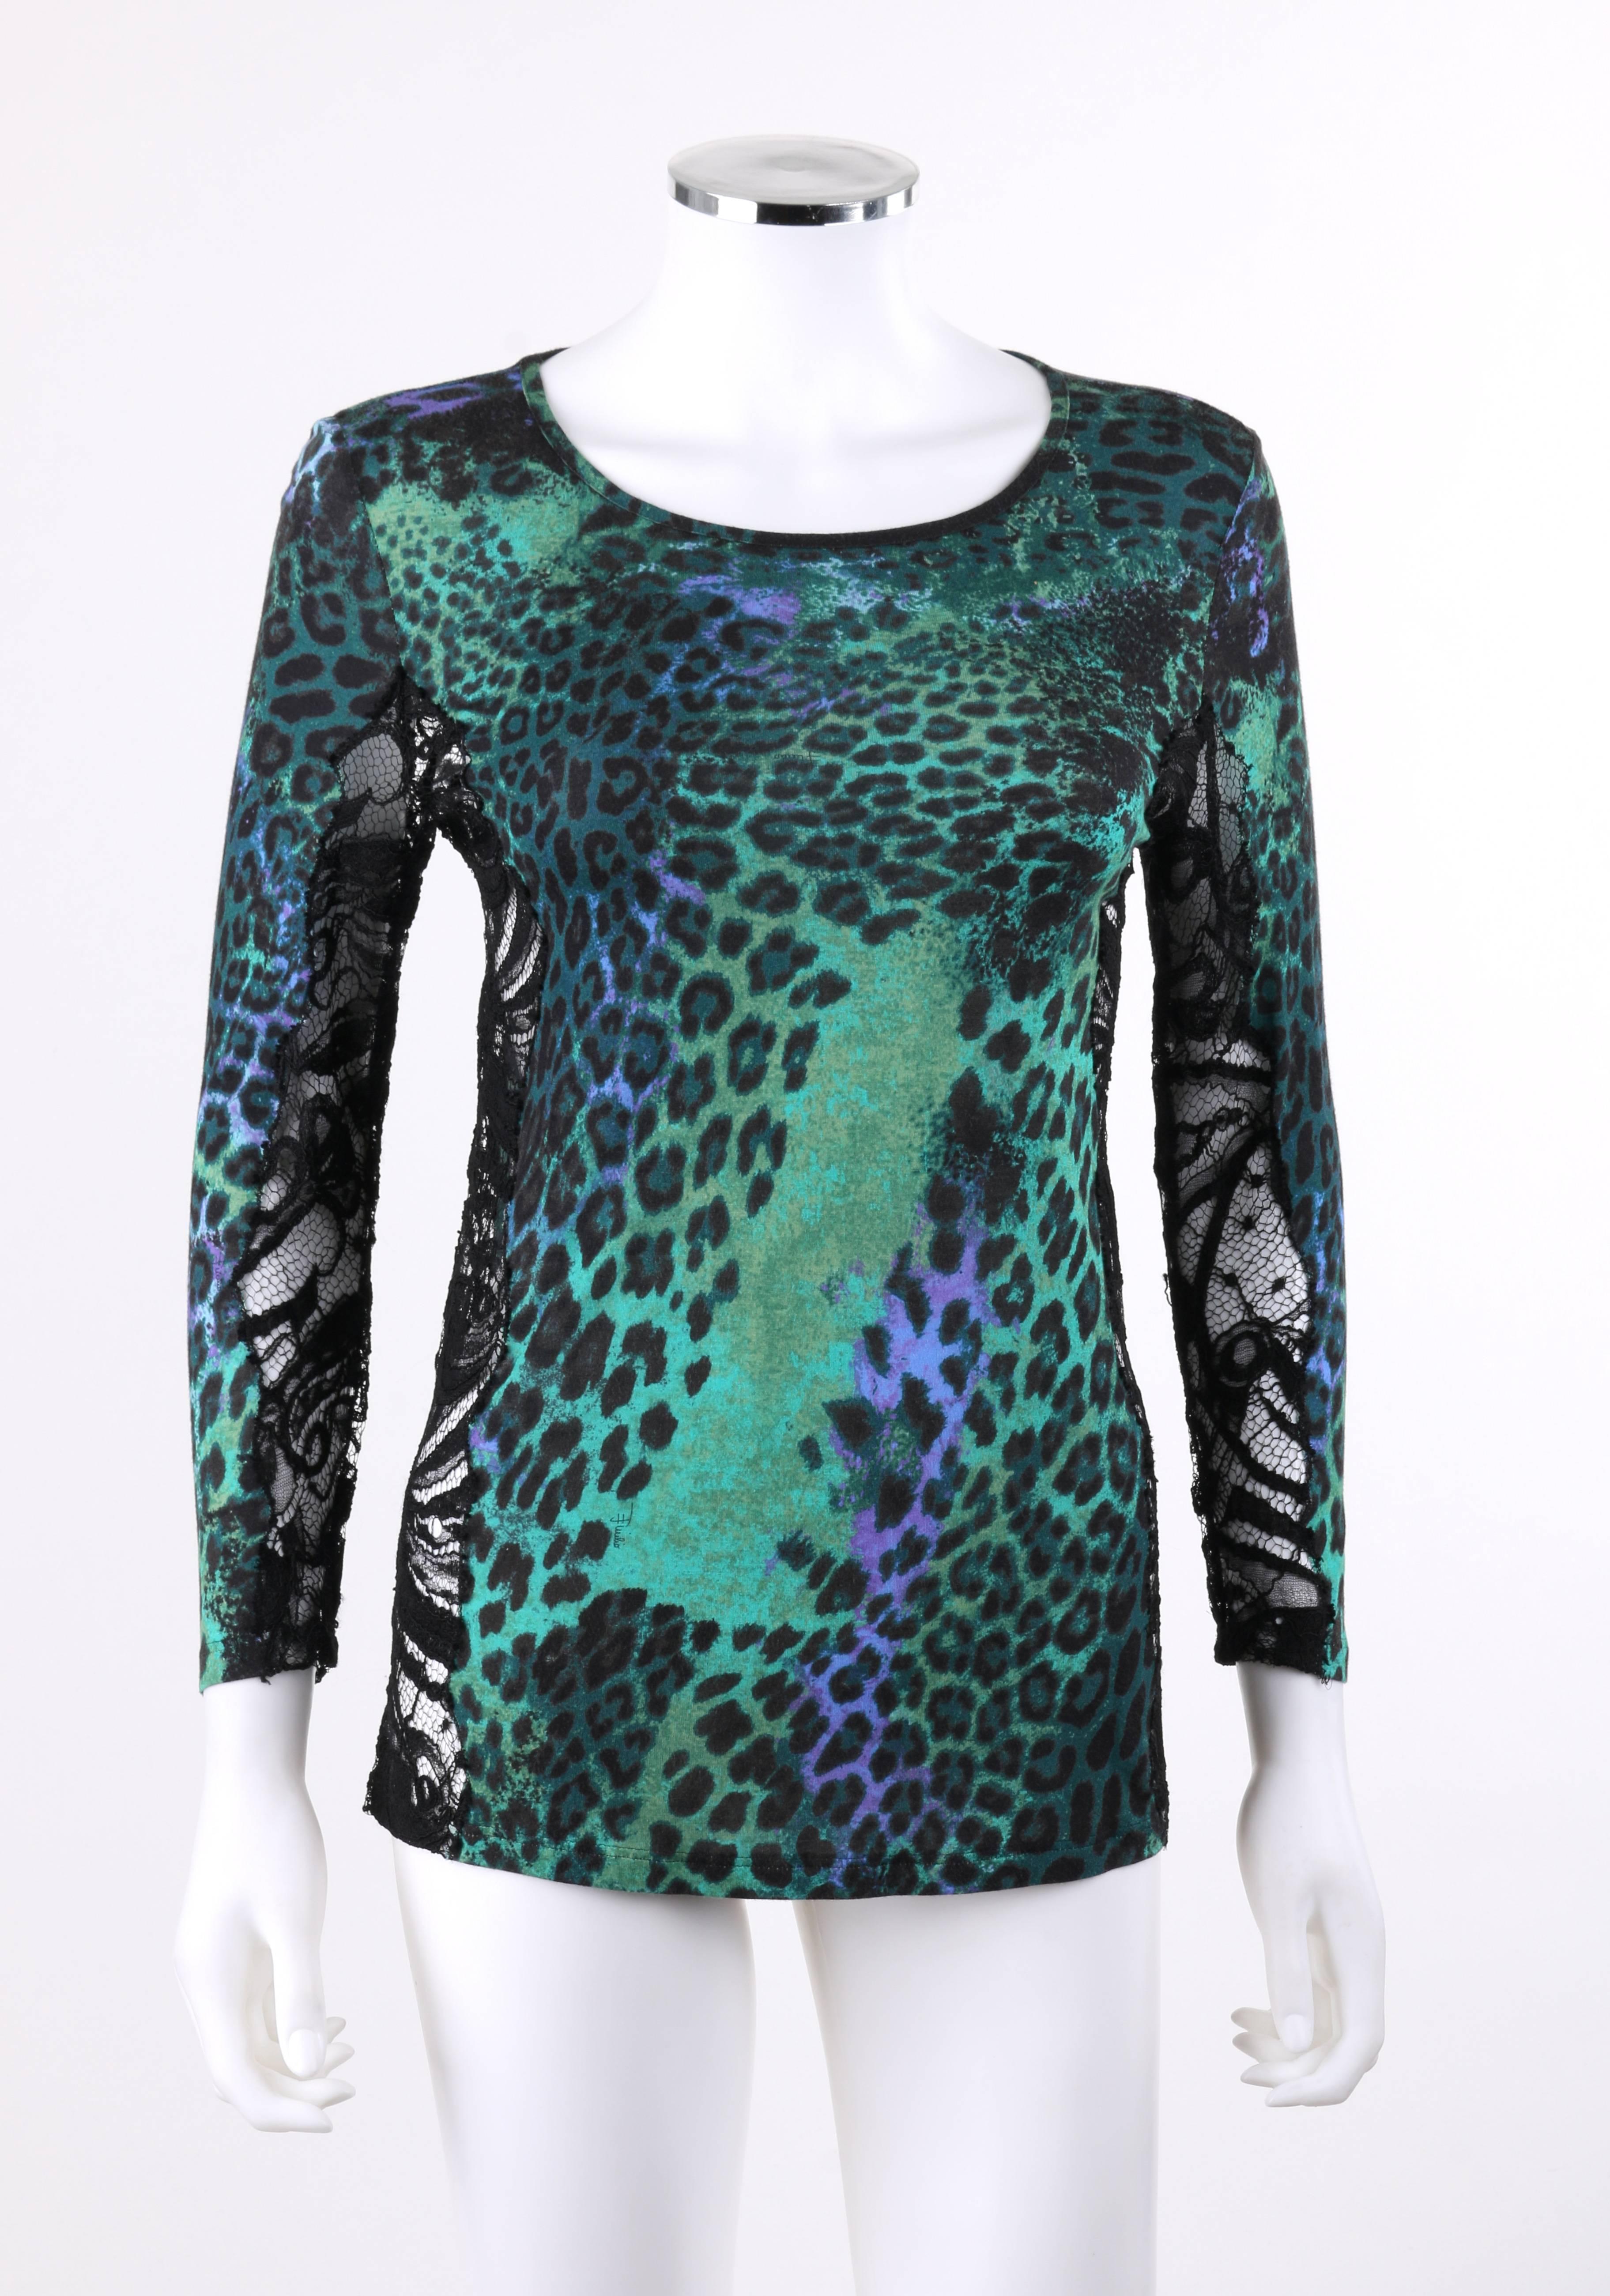 Emilio Pucci Pre-Fall 2011 green multi-color leopard print knit and black lace inset top. Designed by Peter Dundas. Abstract leopard print knit in shades of green, blue, and black. Scoop neckline. 3/4 length sleeves. Pull over style. Black lace